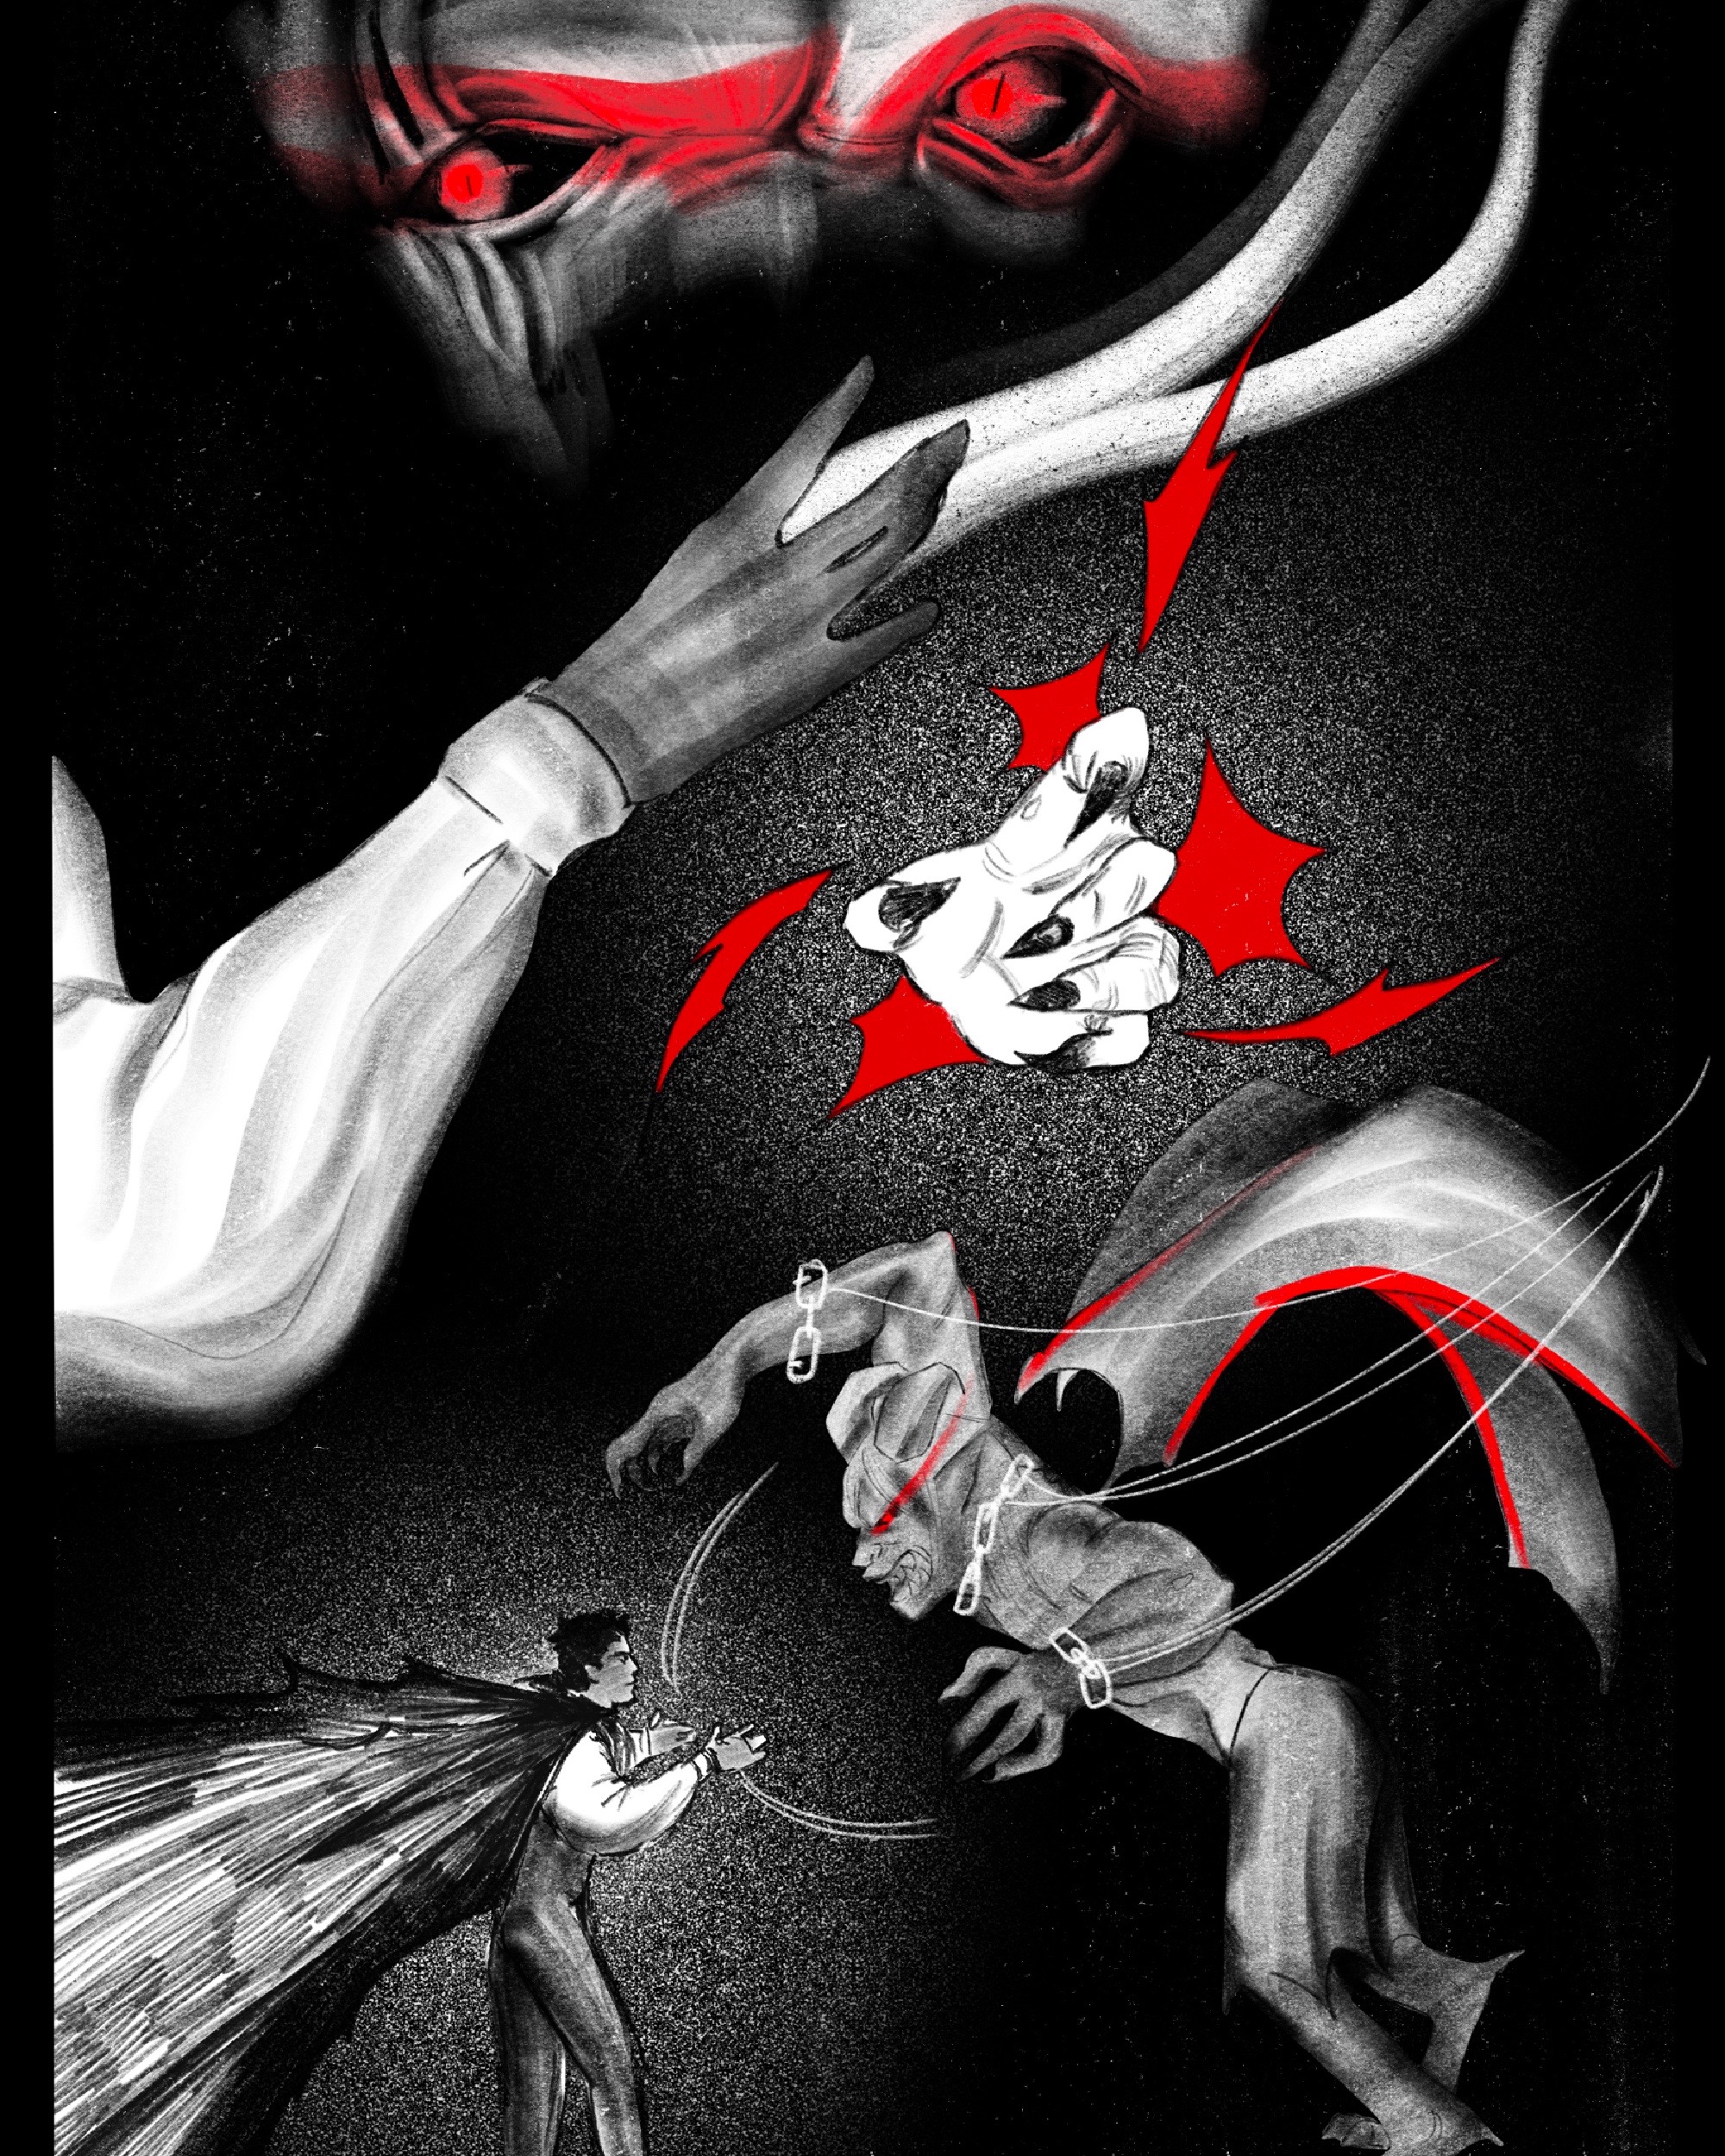 BA Illustration work by Camille Bakal, depicting a busy comic page in black white and red, with two character using magic to fight.